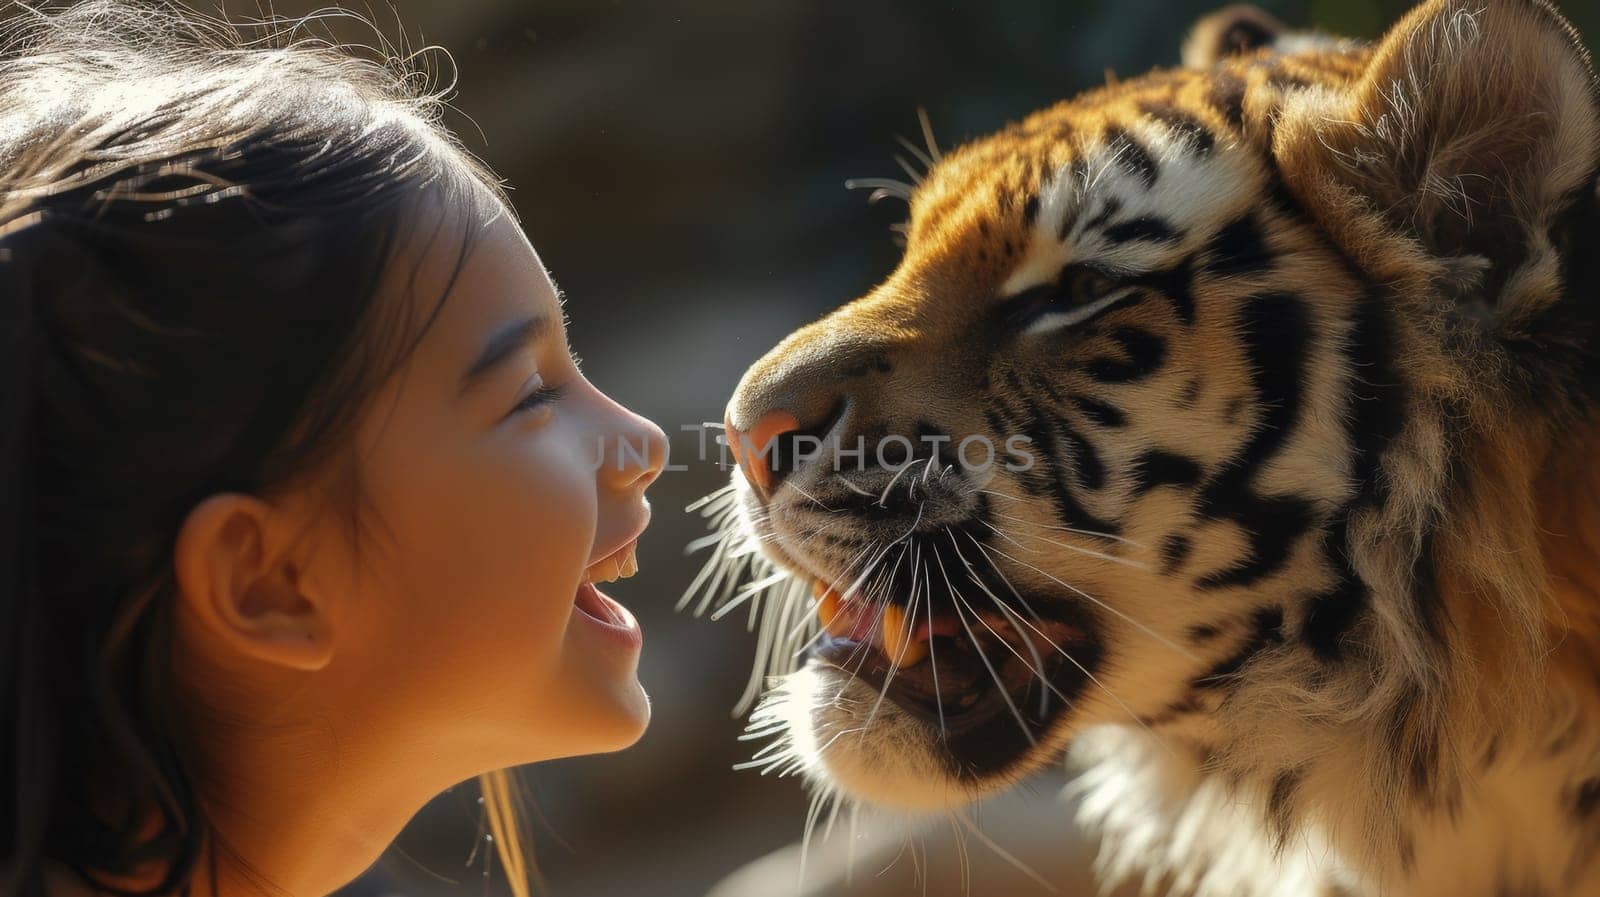 A young girl smiling at a tiger that is close to her, AI by starush